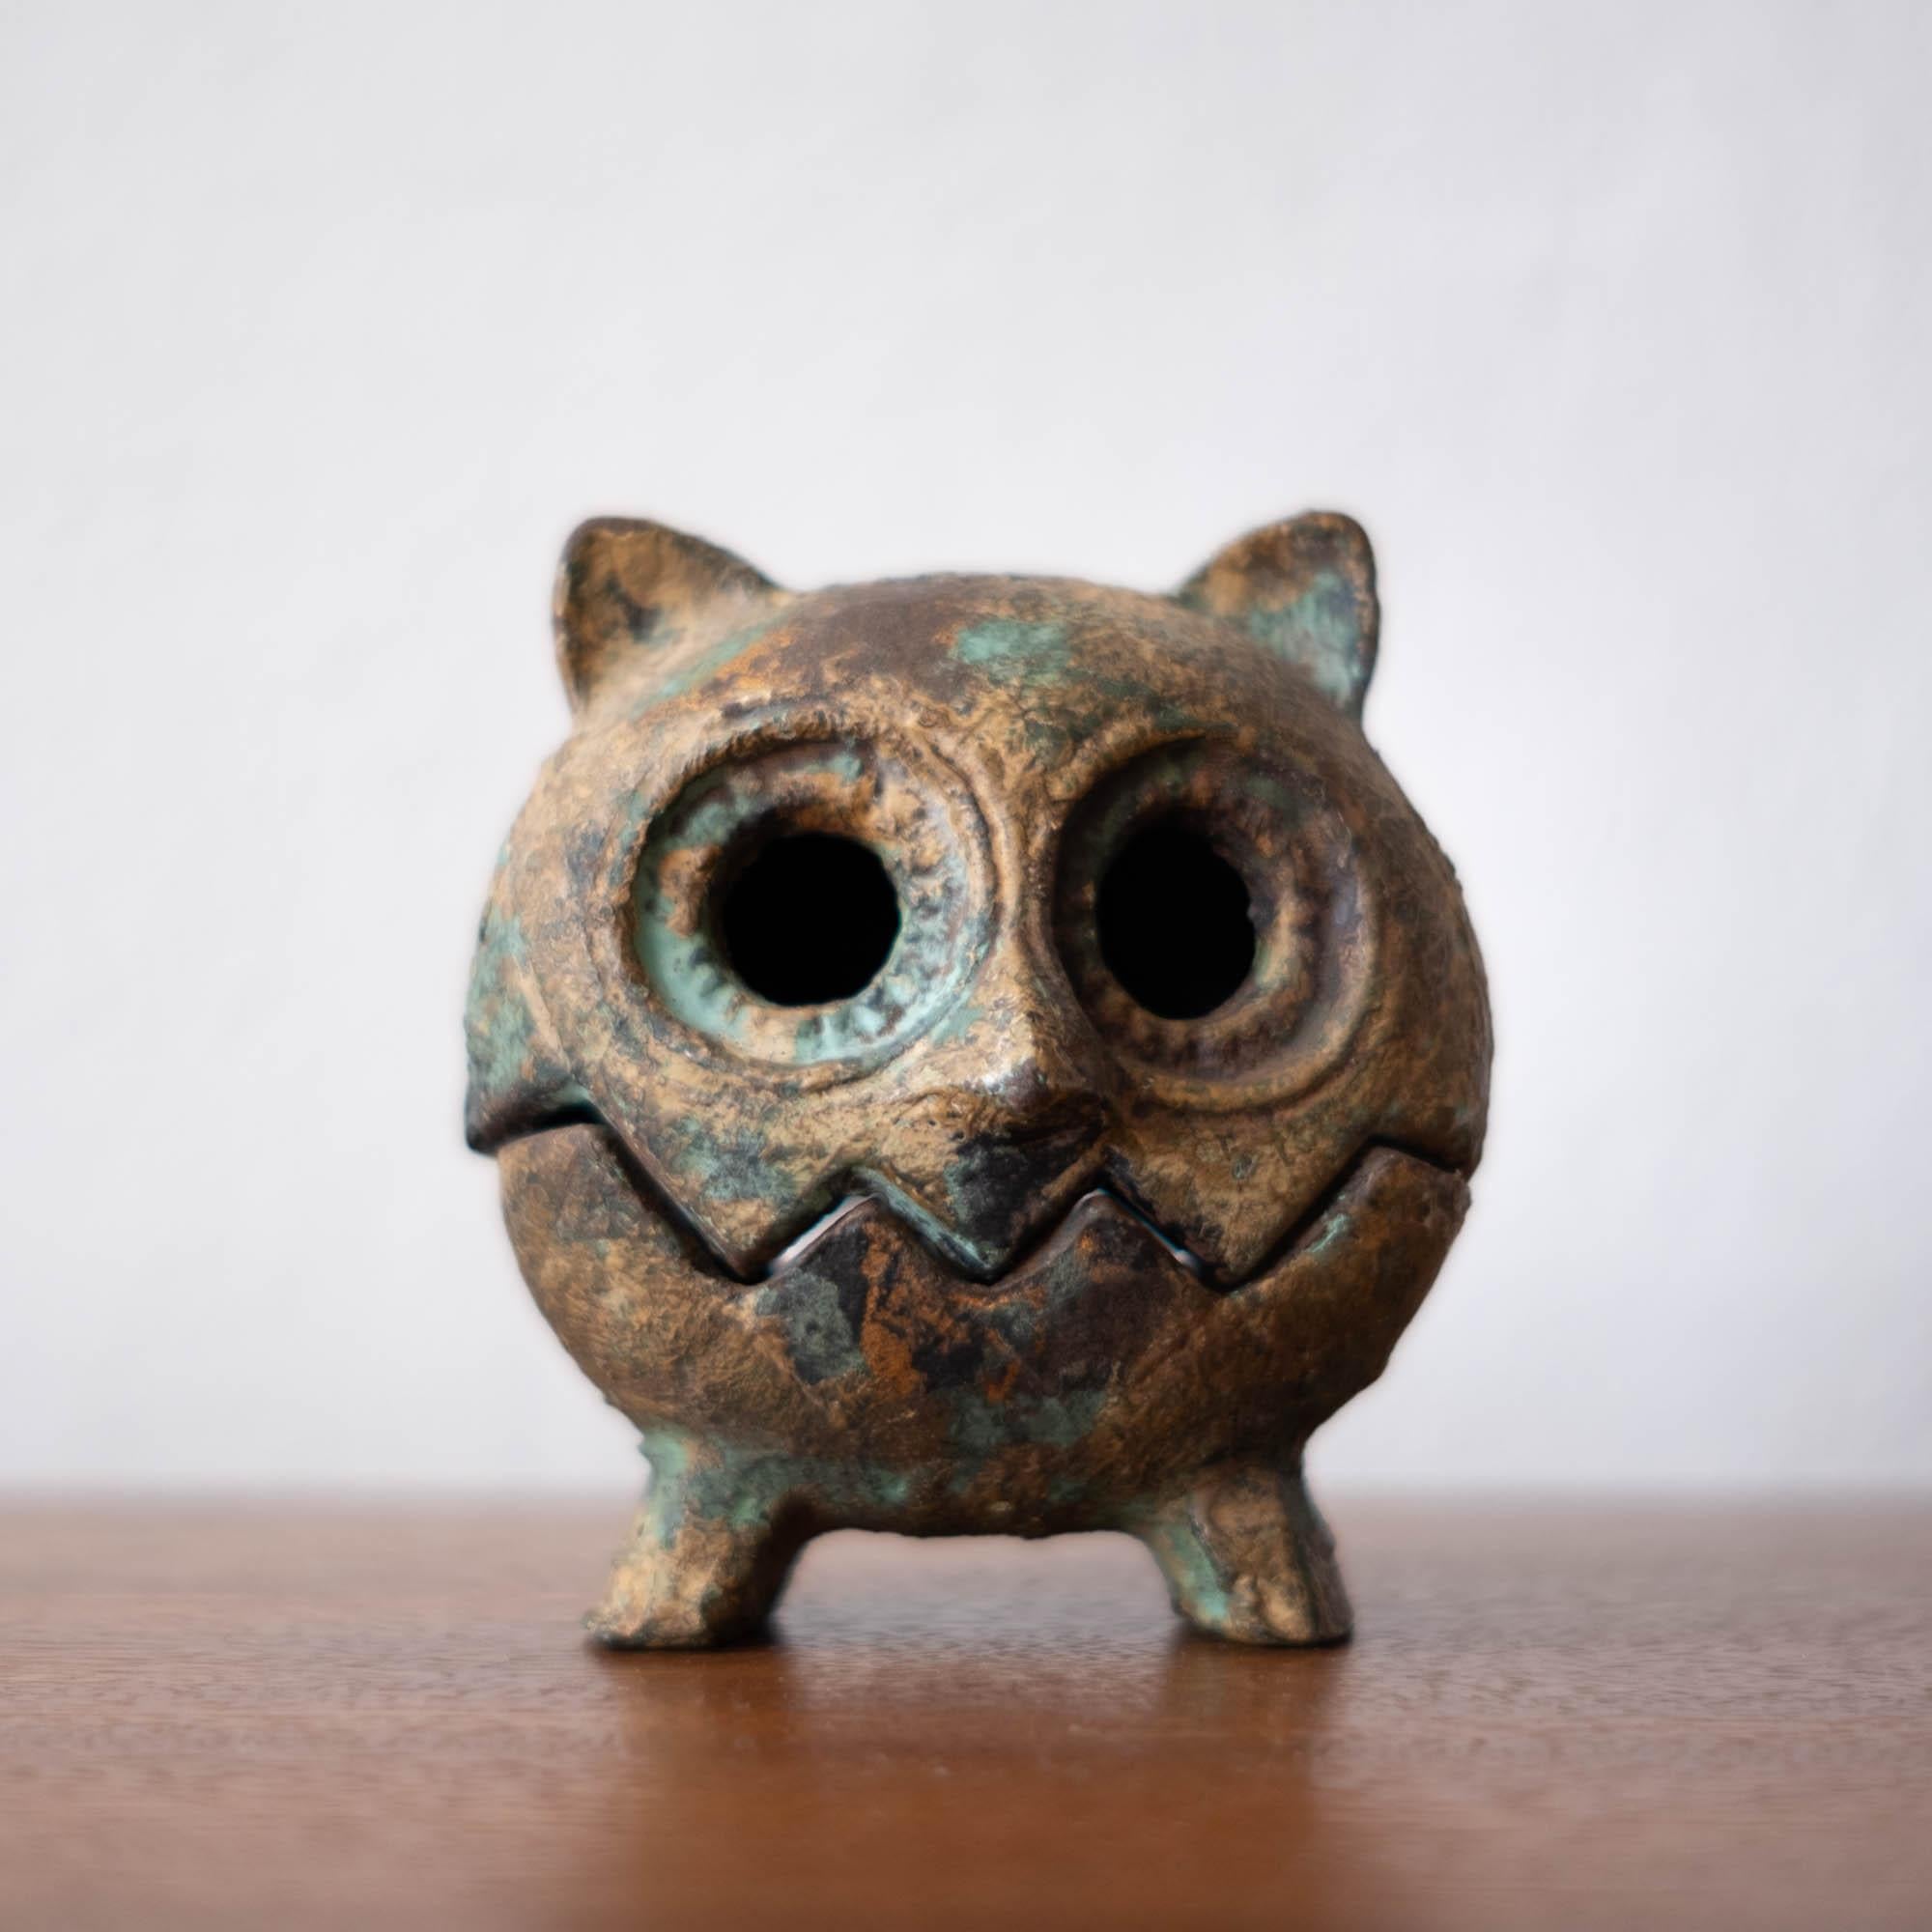 Midcentury iron owl sculpture with a nice applied patina. Removable top for use as a lantern with a small candle or perhaps for burning incense, Japan, 1950s.